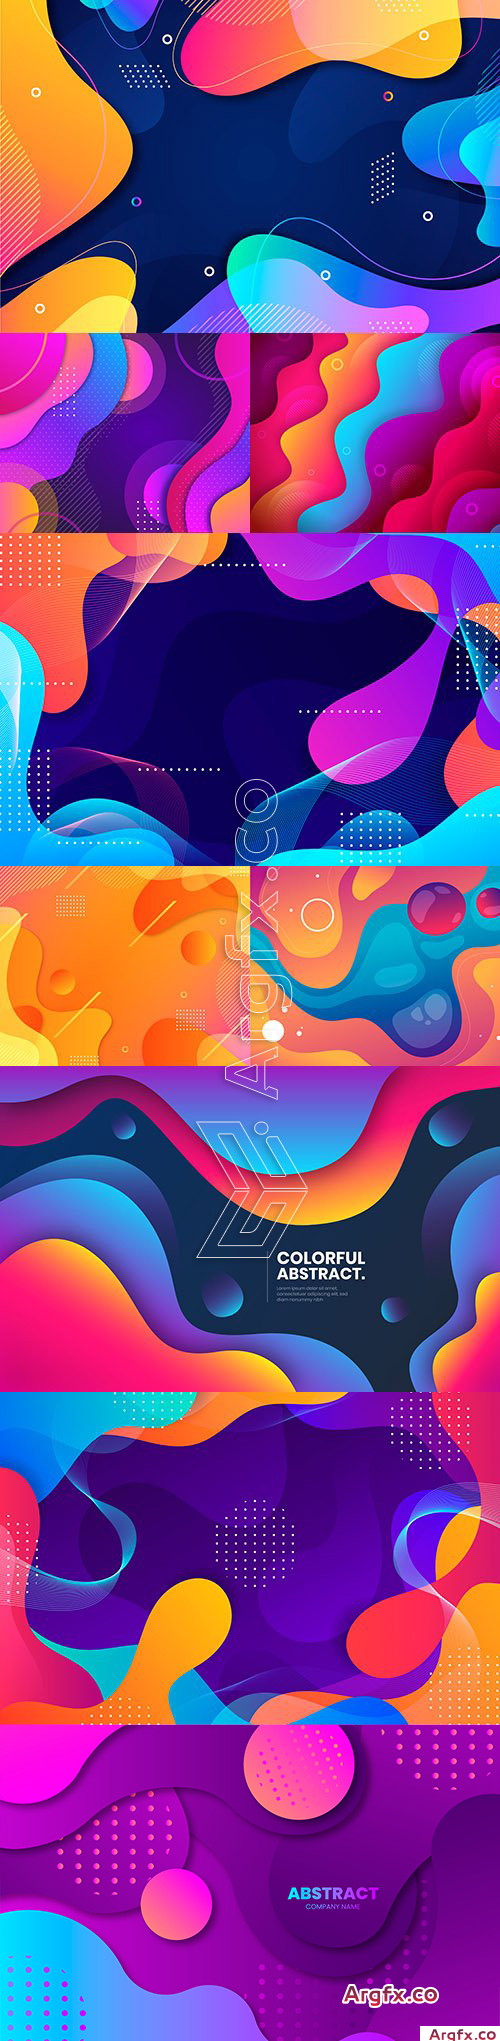 Colorful wavy background gradient abstract design